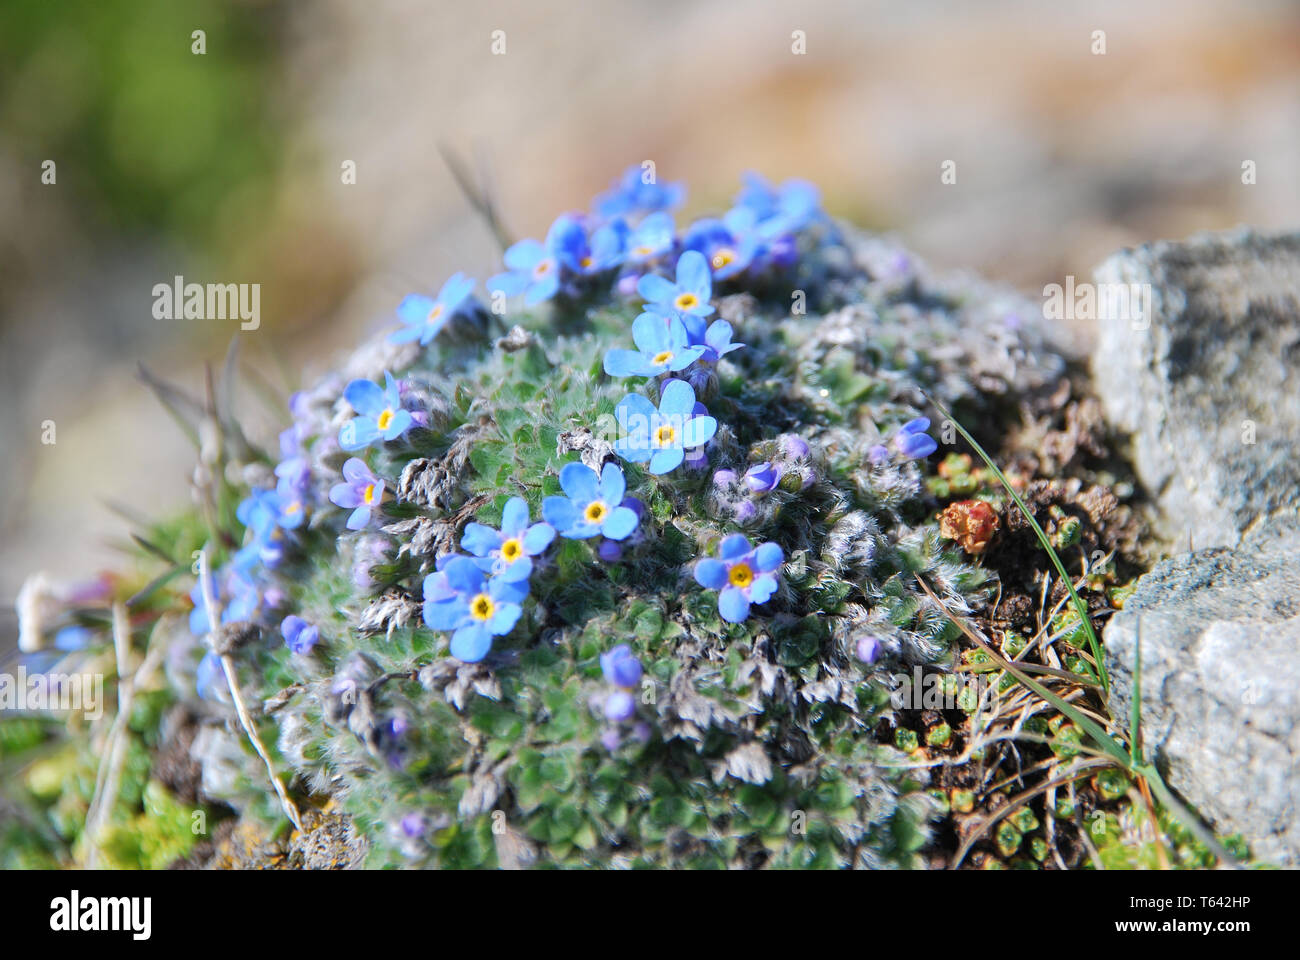 Eritrichium nanum,  arctic alpine forget-me-not, king-of-the-Alps, Himmelsherold, found high up in the austrian alps Stock Photo